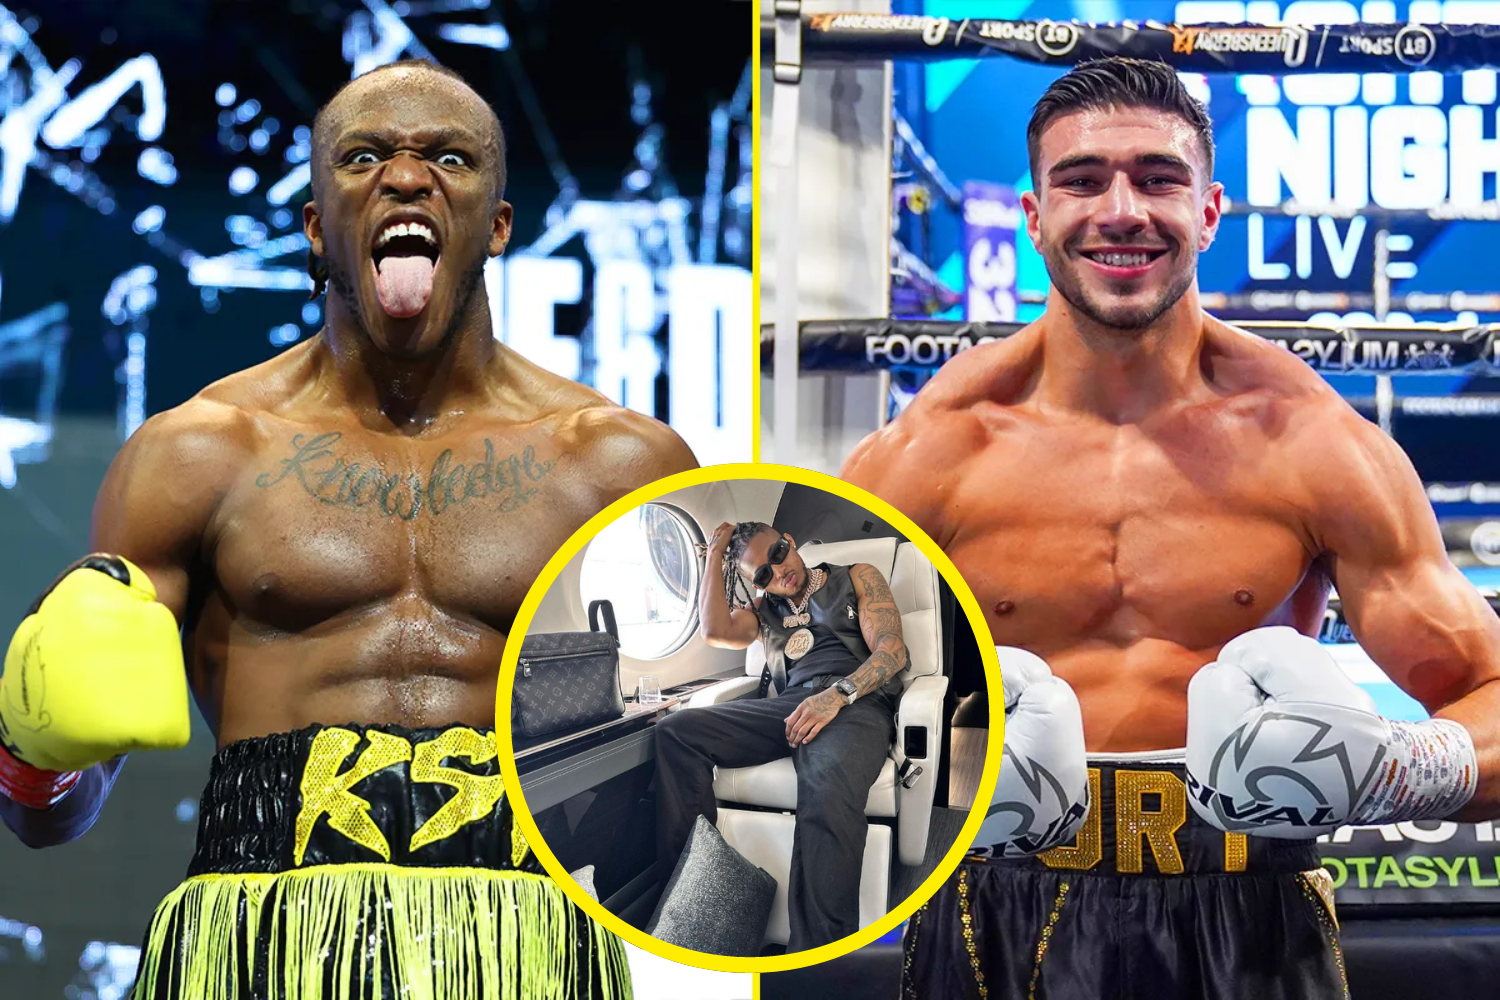 'Easiest money of your life' - Rapper bets $100k on KSI to knock out Tommy Fury